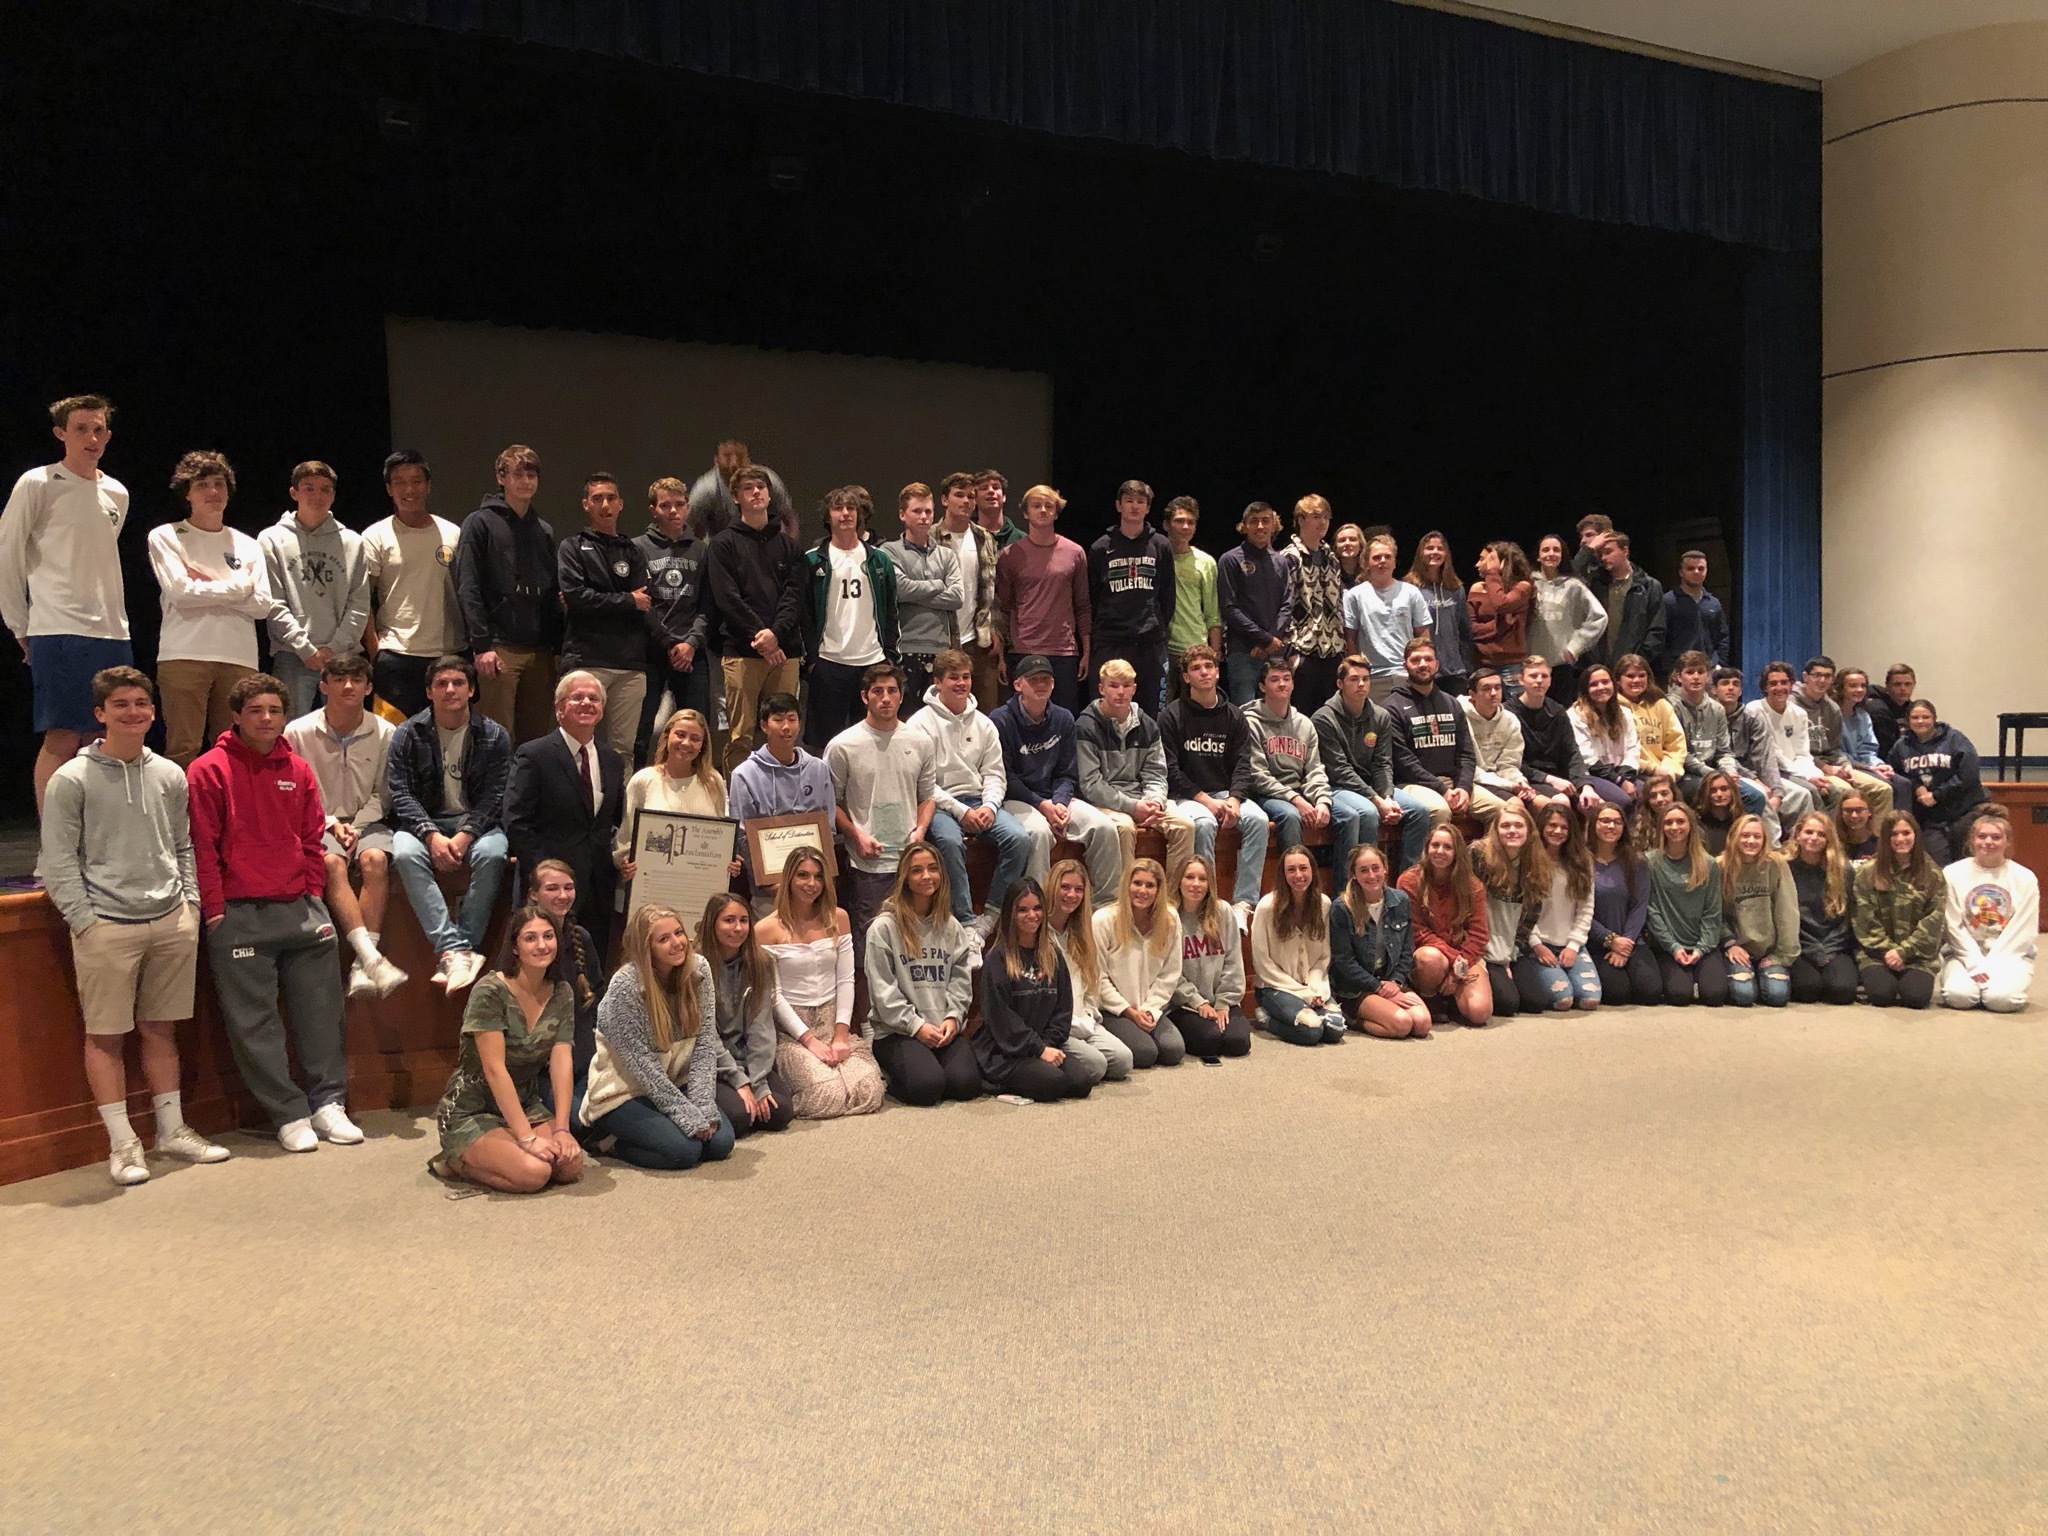 Westhampton Beach senior student-athletes gathered on October 16 to receive a proclamation from State Assemblyman Fred Thiele.